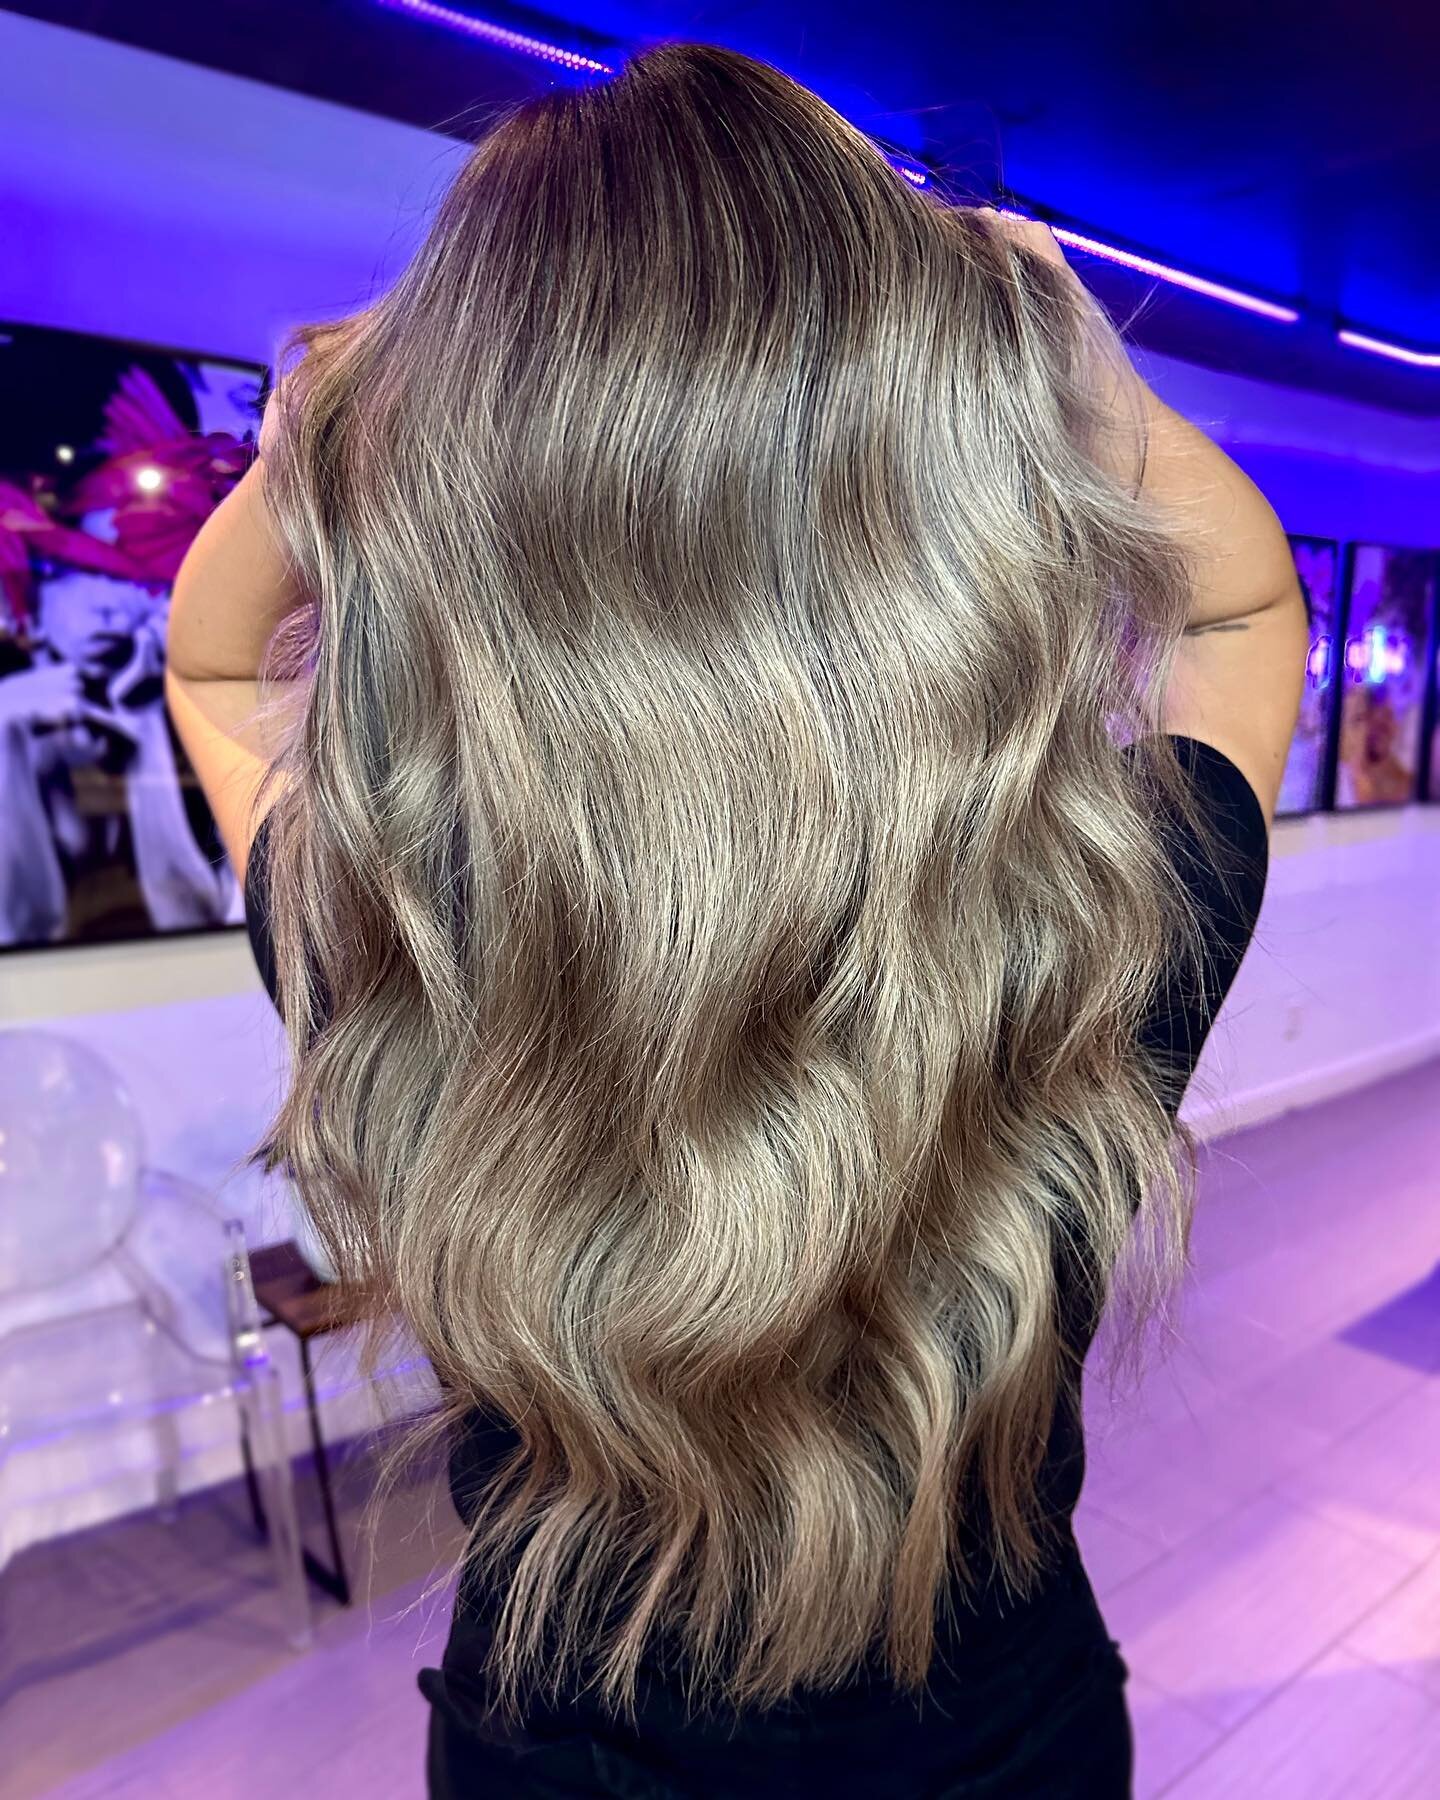 &bull; Ash bronde balayage done by @jenz.hair 
⠀⠀⠀⠀⠀⠀⠀⠀⠀
We are now accepting clients at a reduced rate with Jenny while she continues to learn and grow! Prices are quoted based on the work needed to be done. All types of hair texture, colour and len